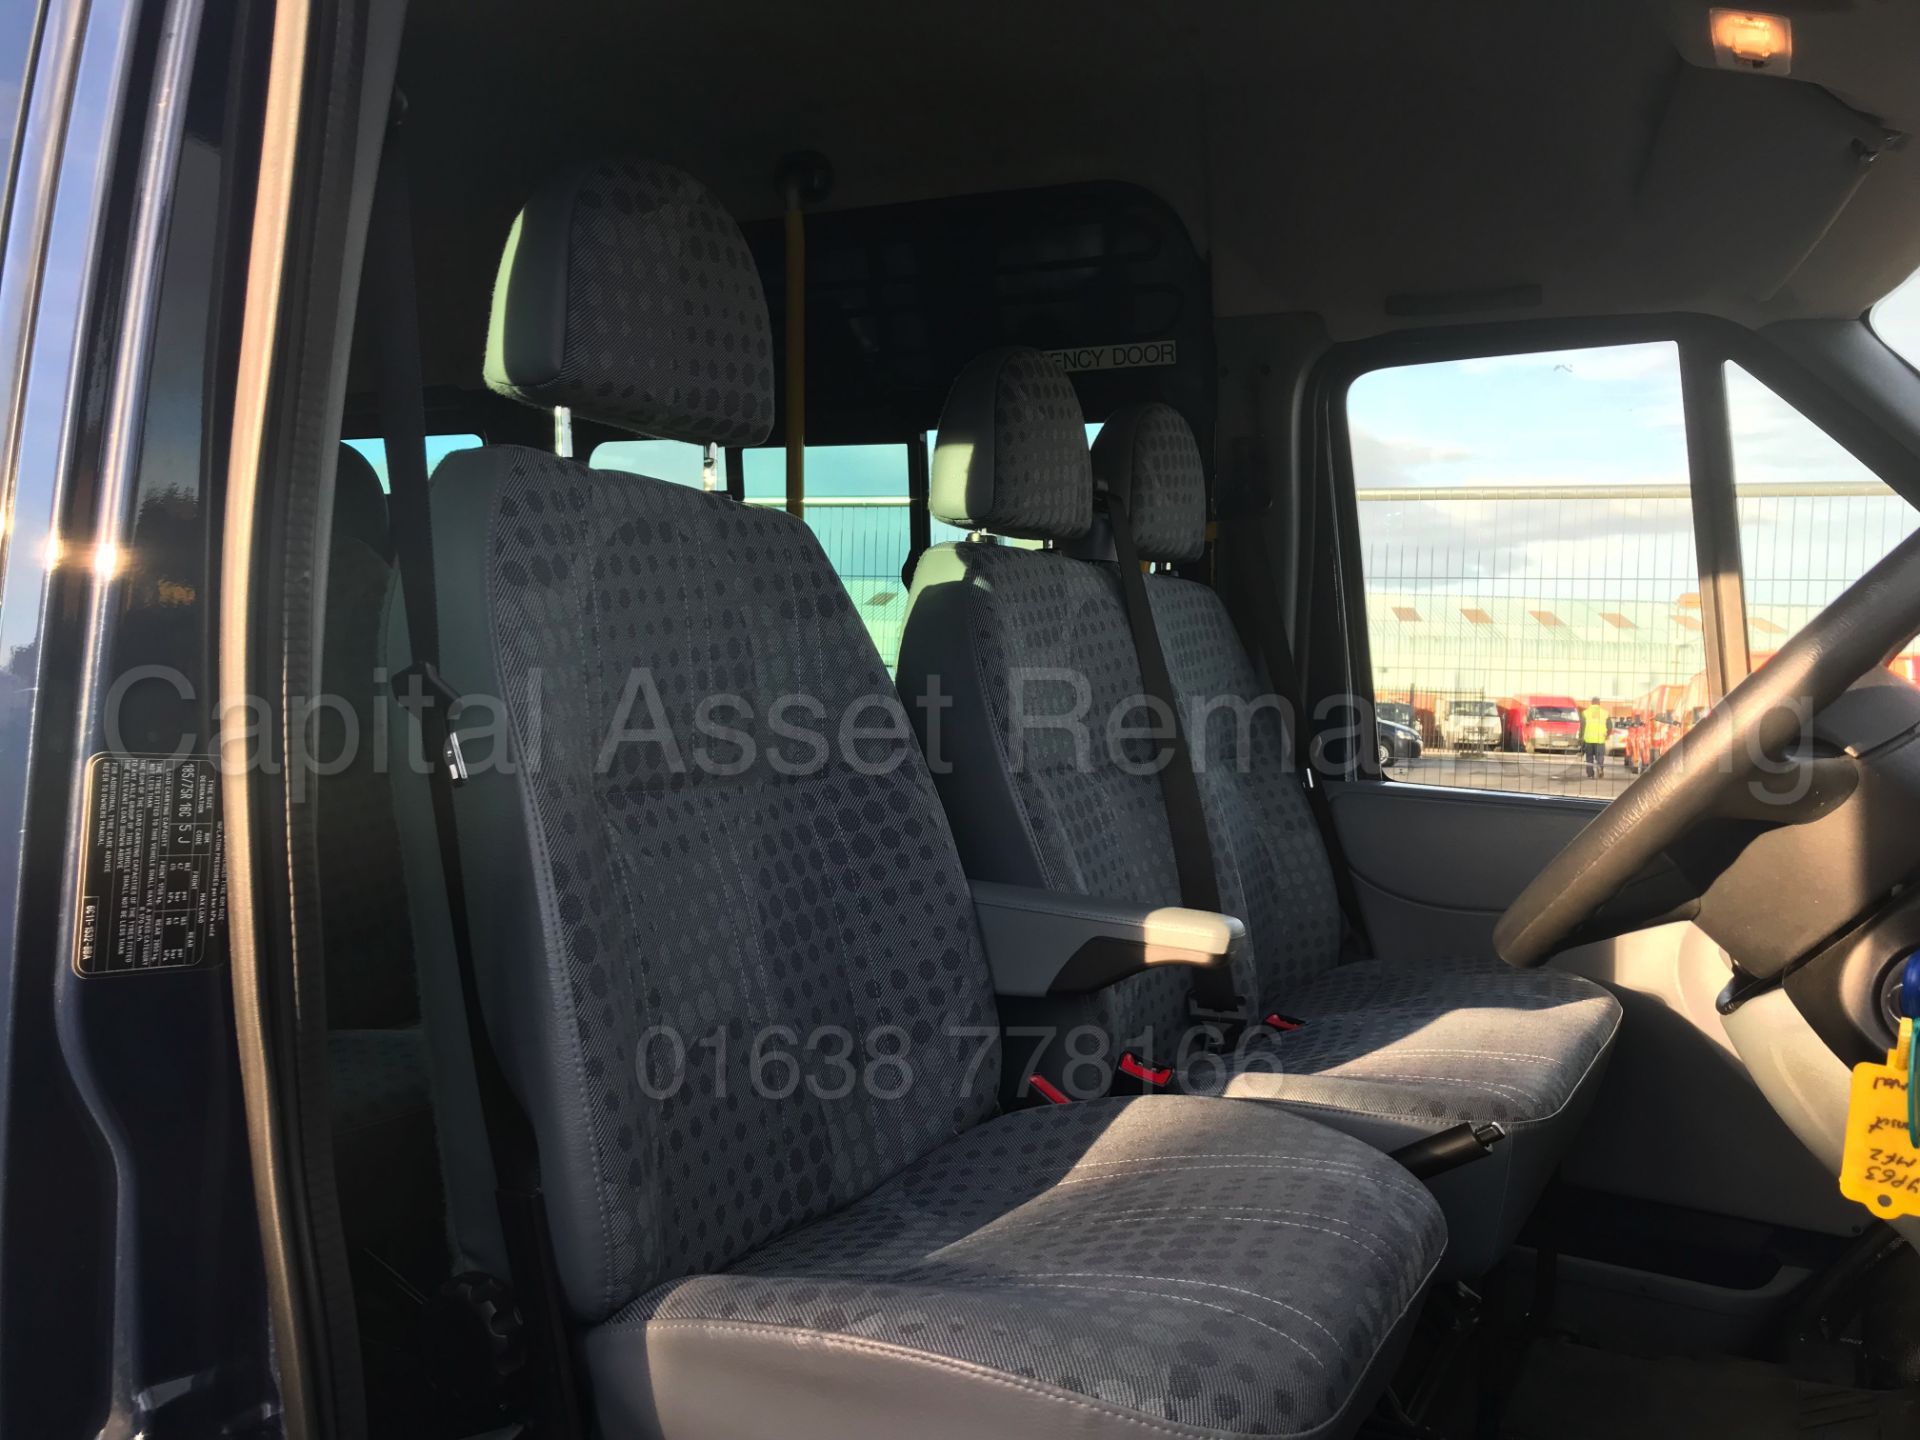 (On Sale) FORD TRANSIT 135 T430 'XLWB -17 SEATER MINI-BUS' (2014 MODEL) '1 OWNER' *5,000 MILES ONLY* - Image 26 of 36